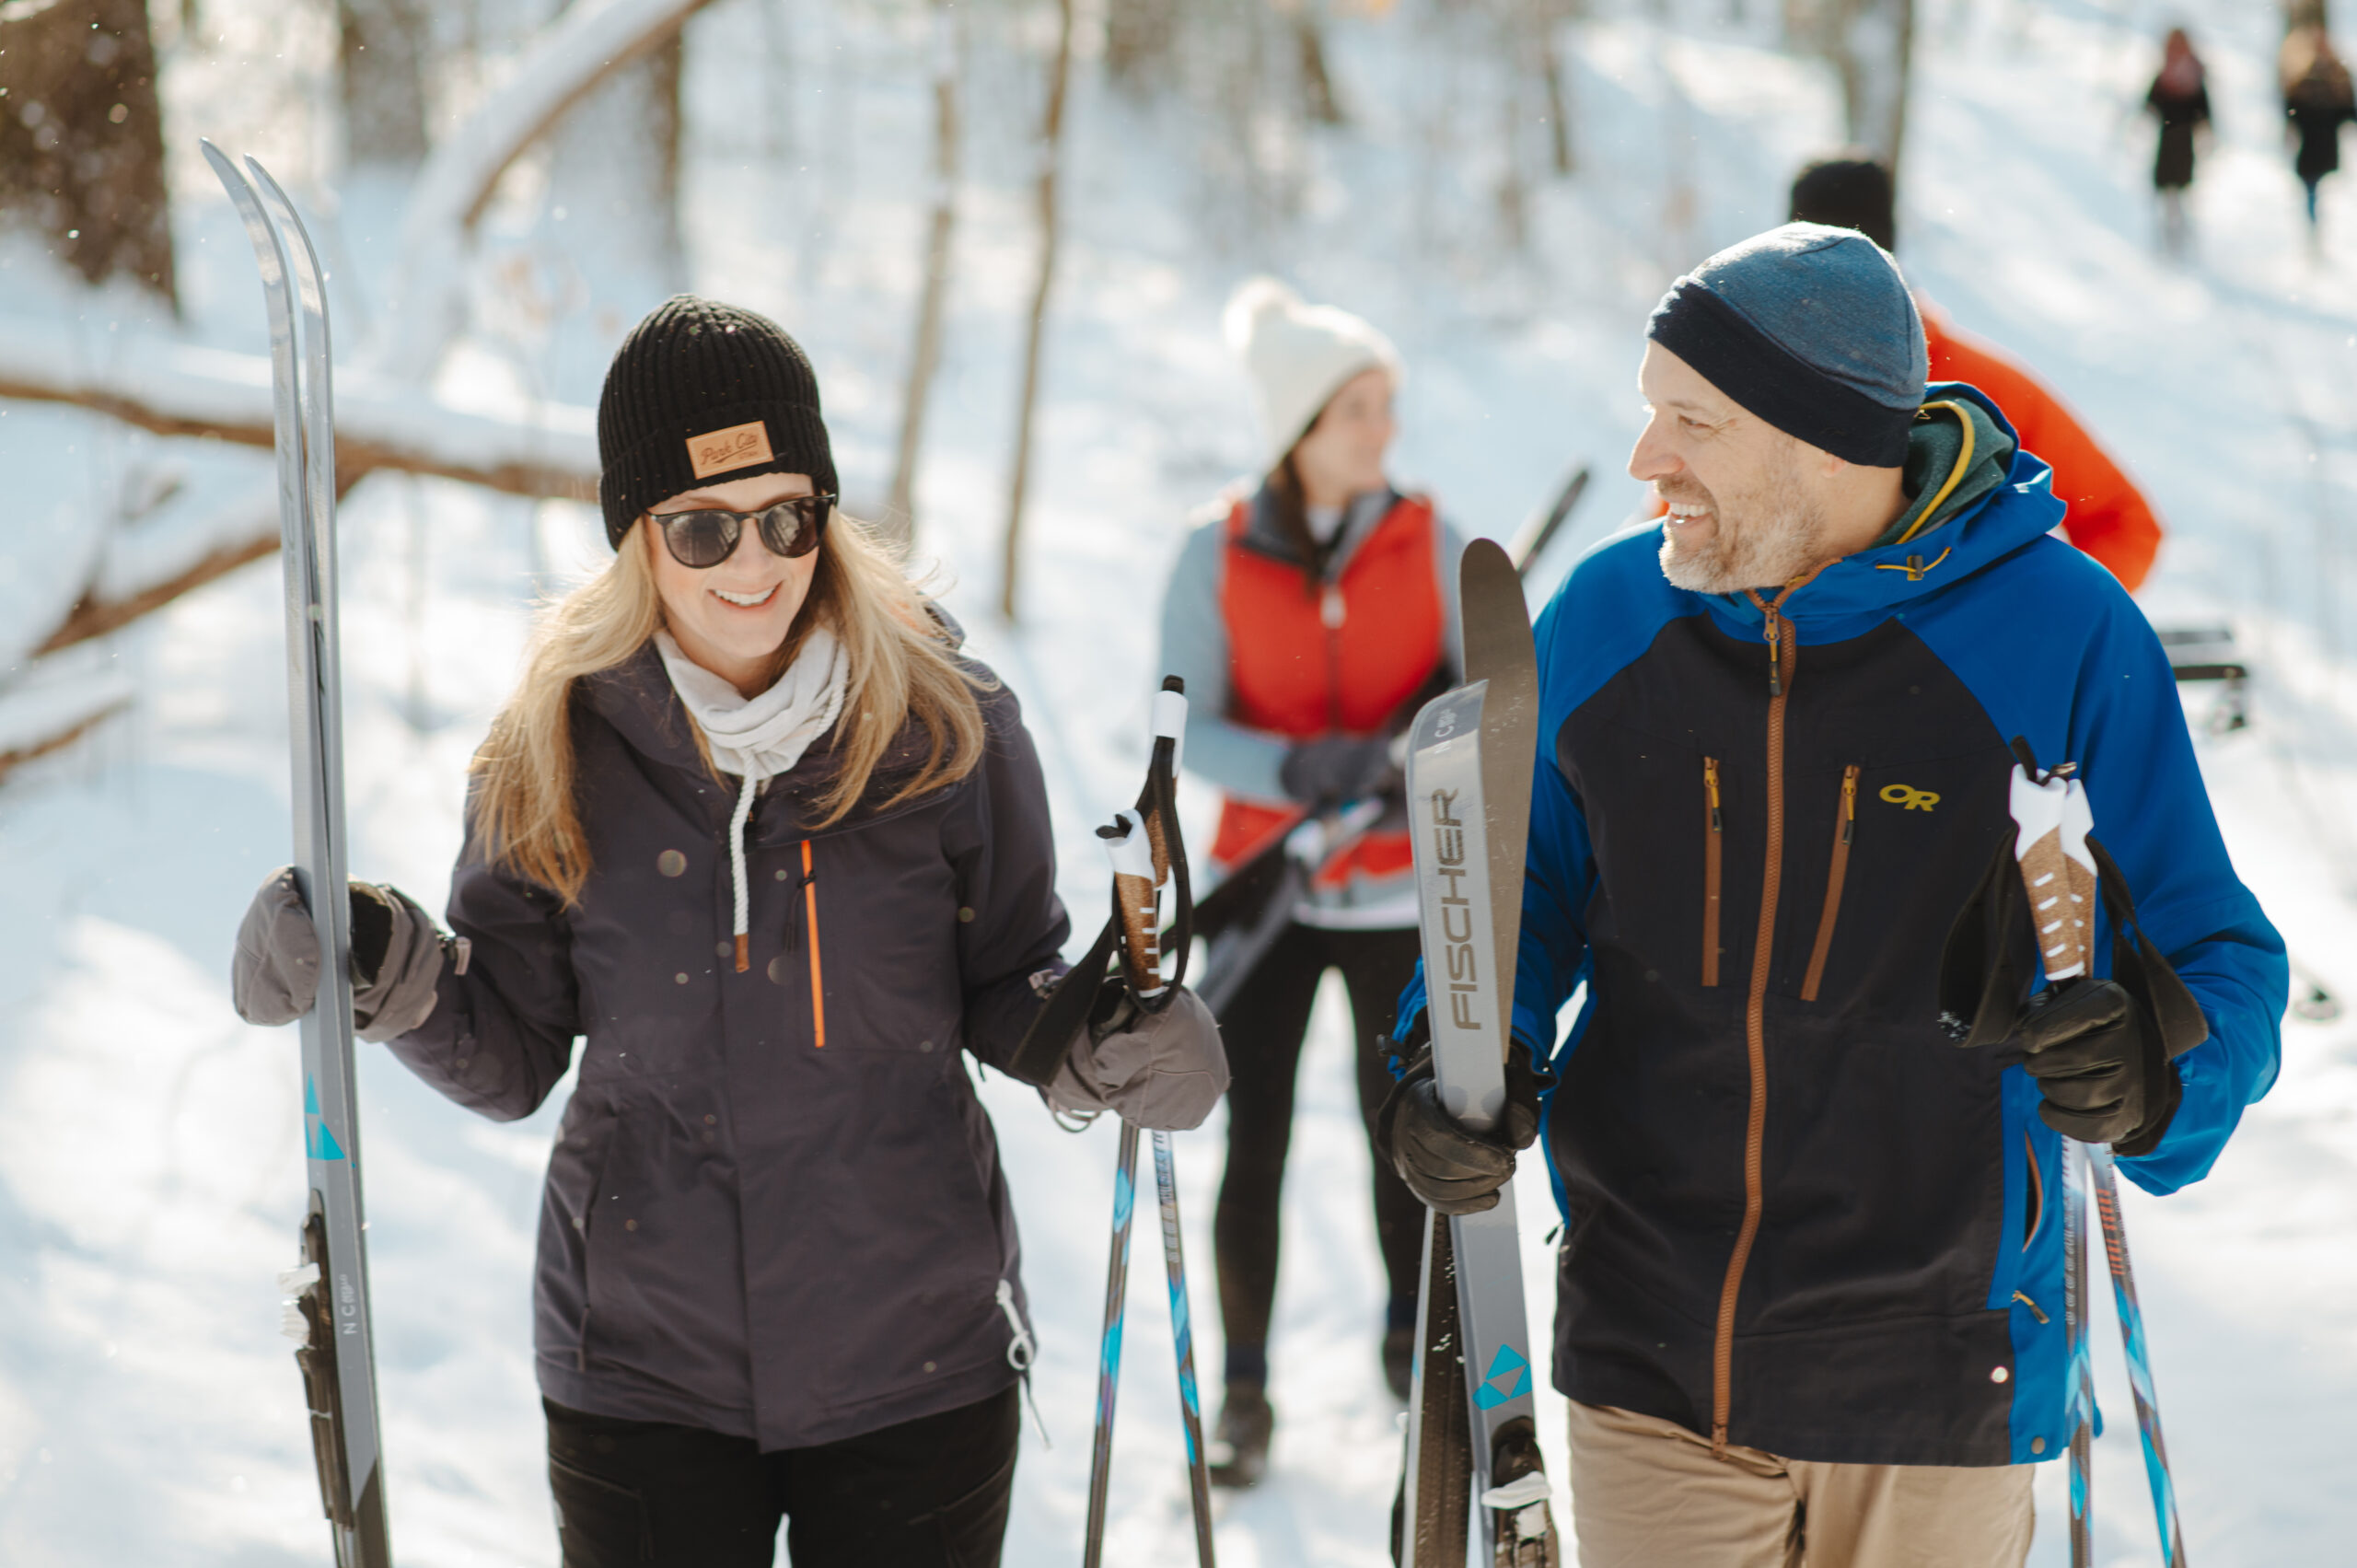 Two people smiling and cross country skiing at Saugatuck Dunes State Park.